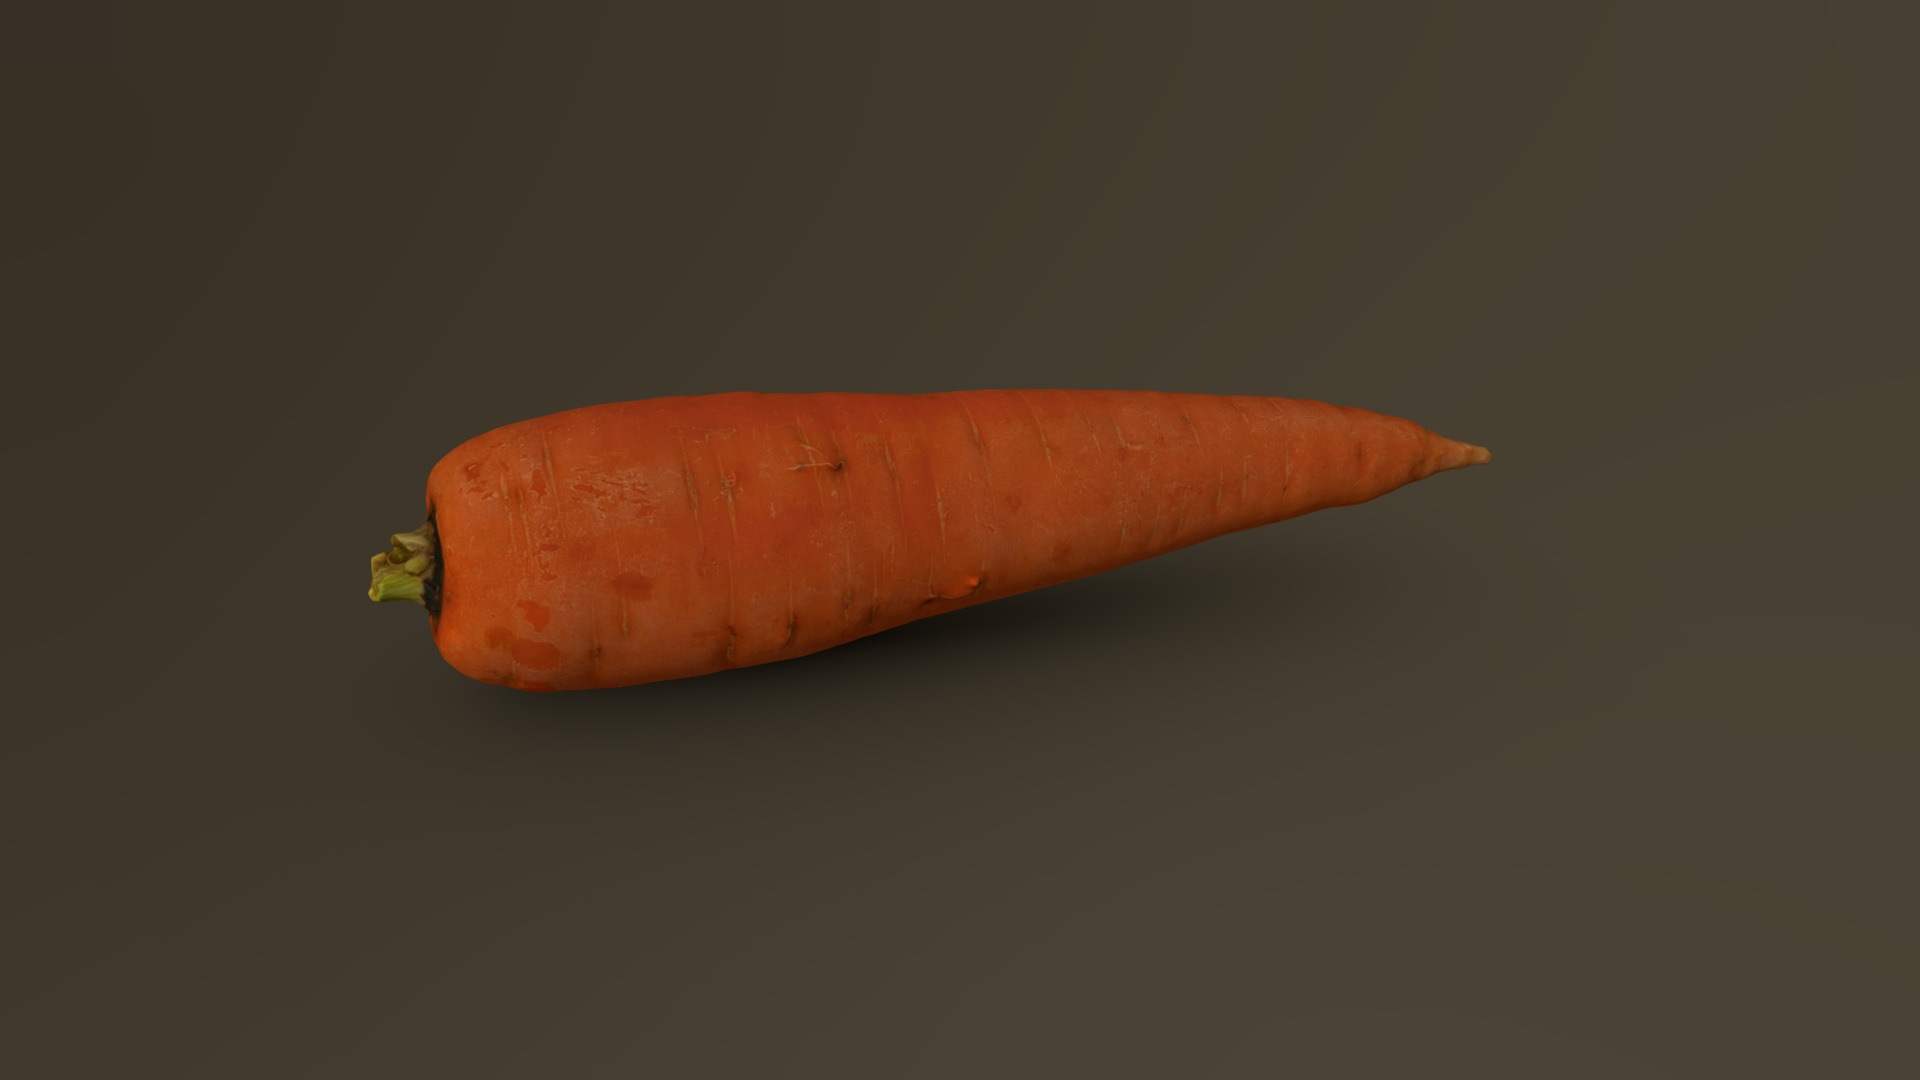 3D model Carrot 11 - This is a 3D model of the Carrot 11. The 3D model is about a carrot with a stem.